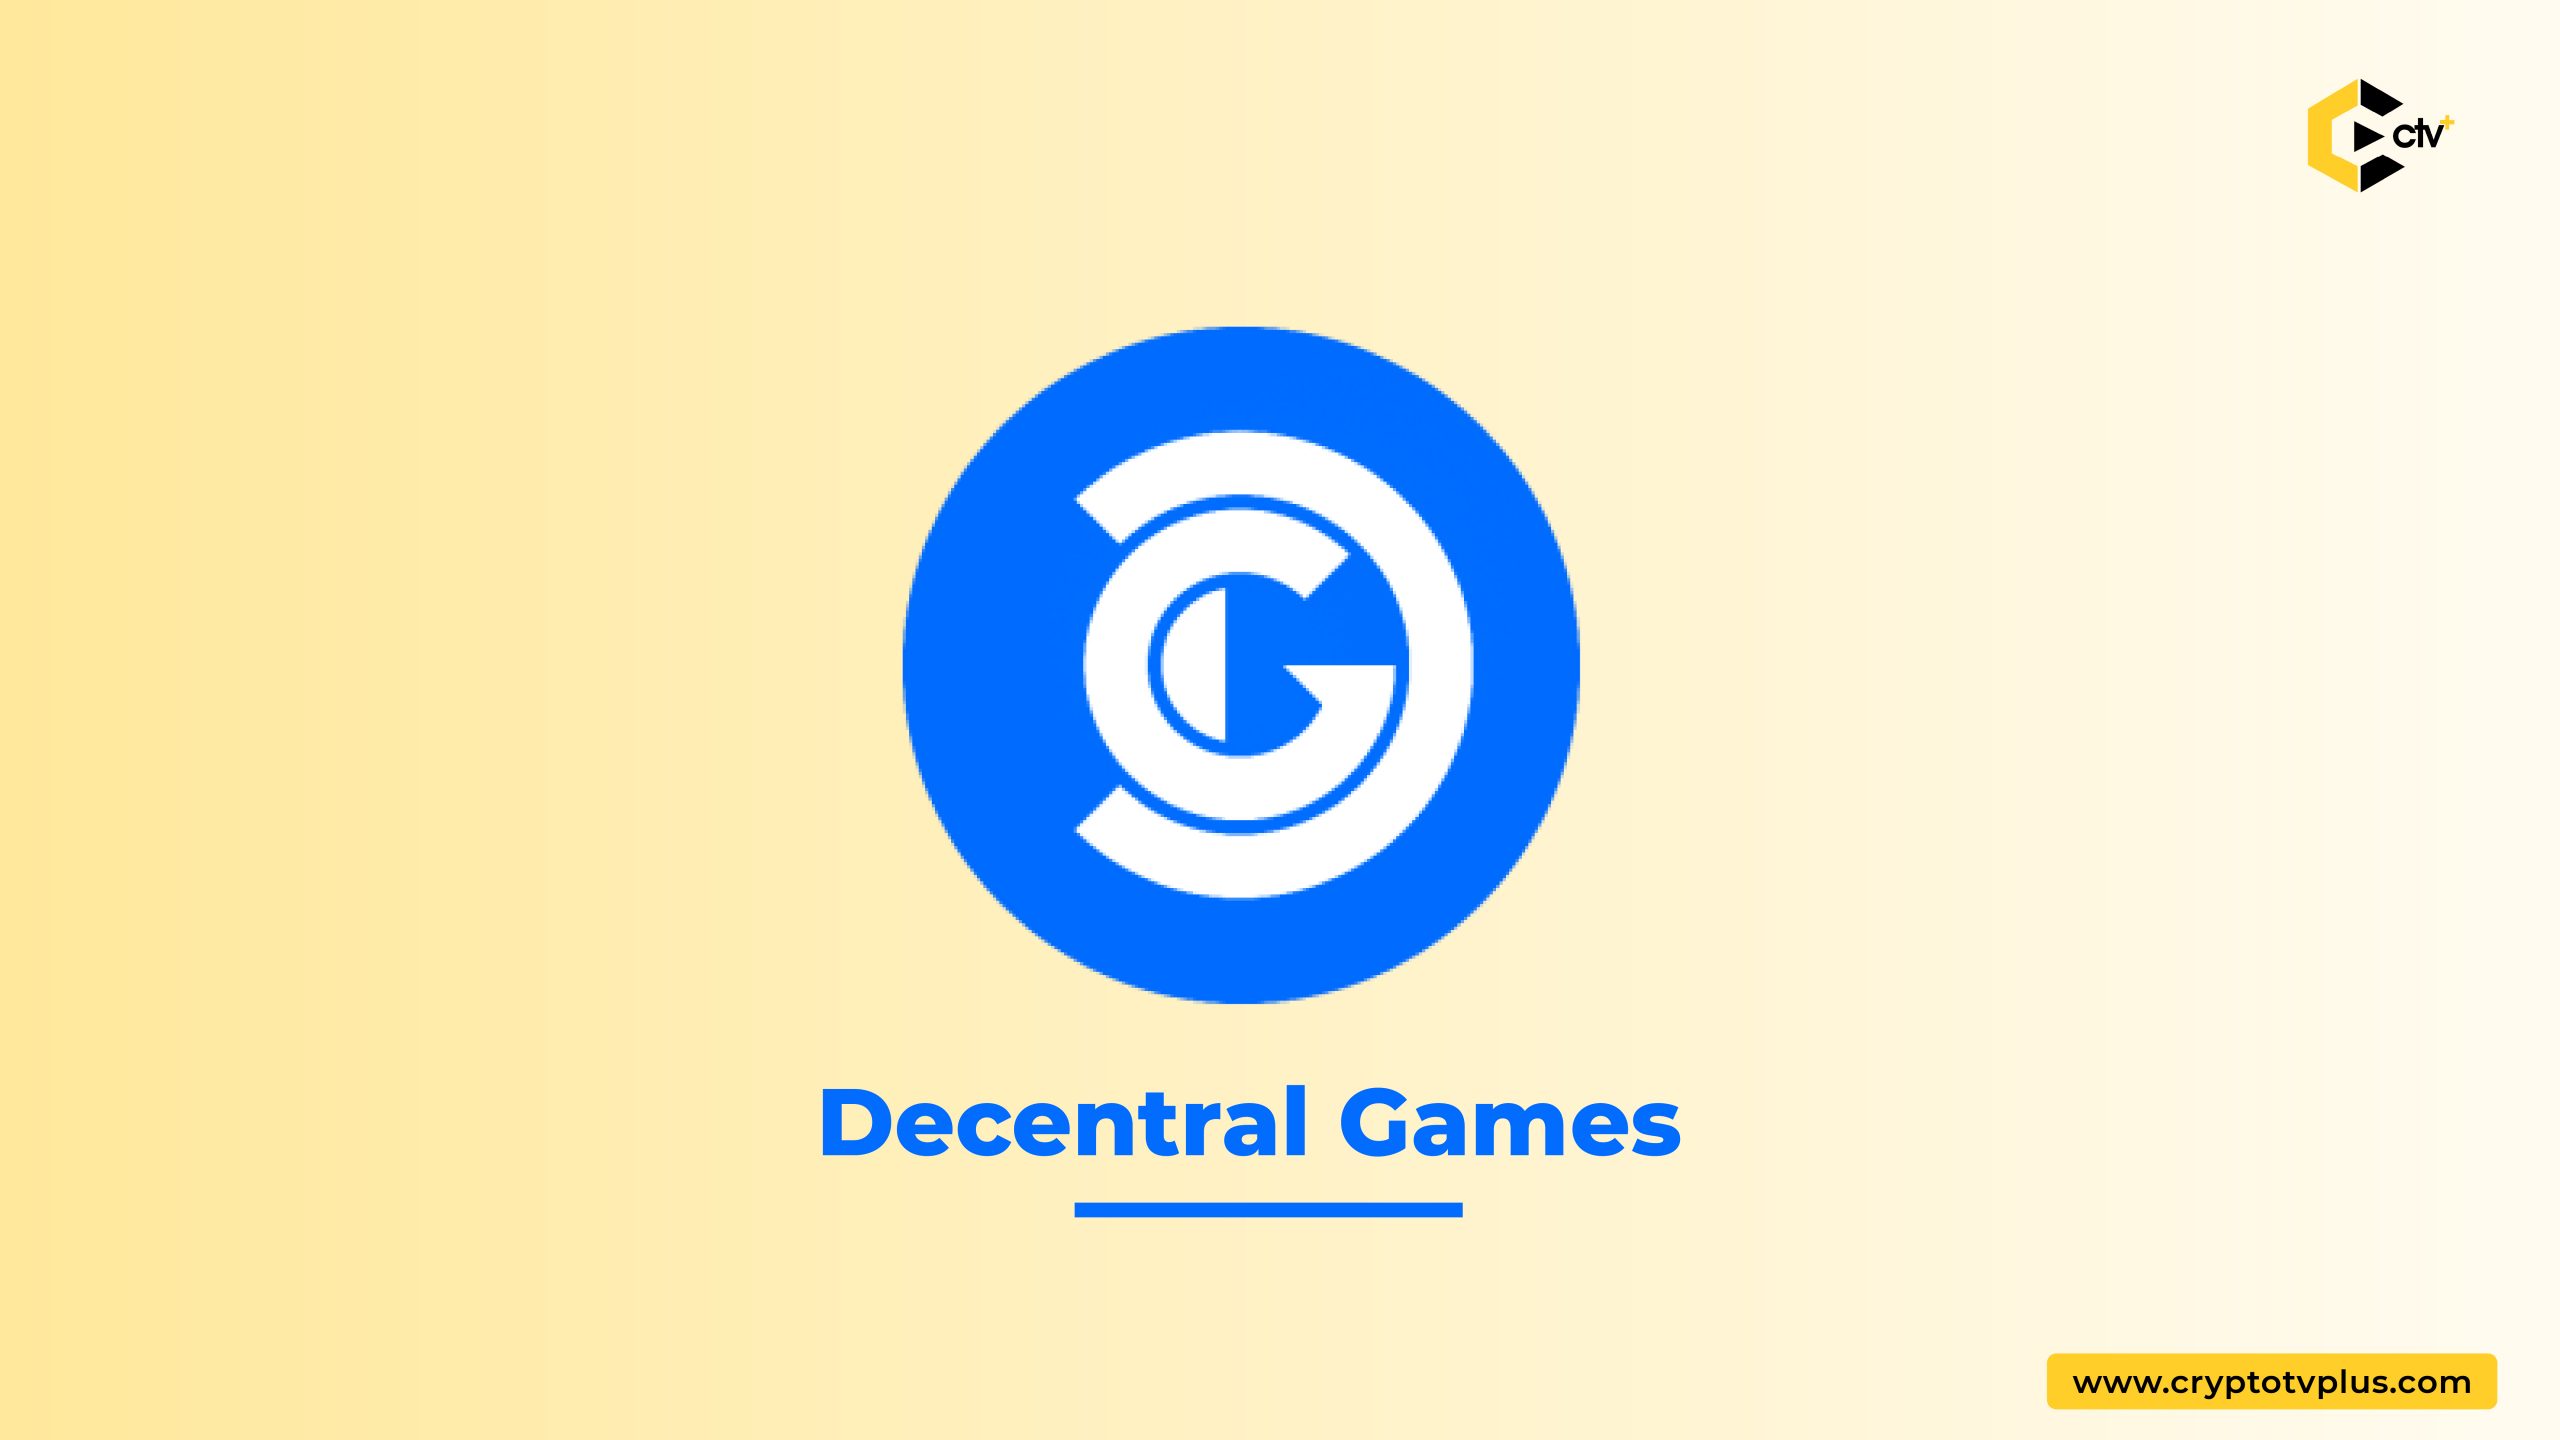 Why Decentral Games will be hot in 2022

